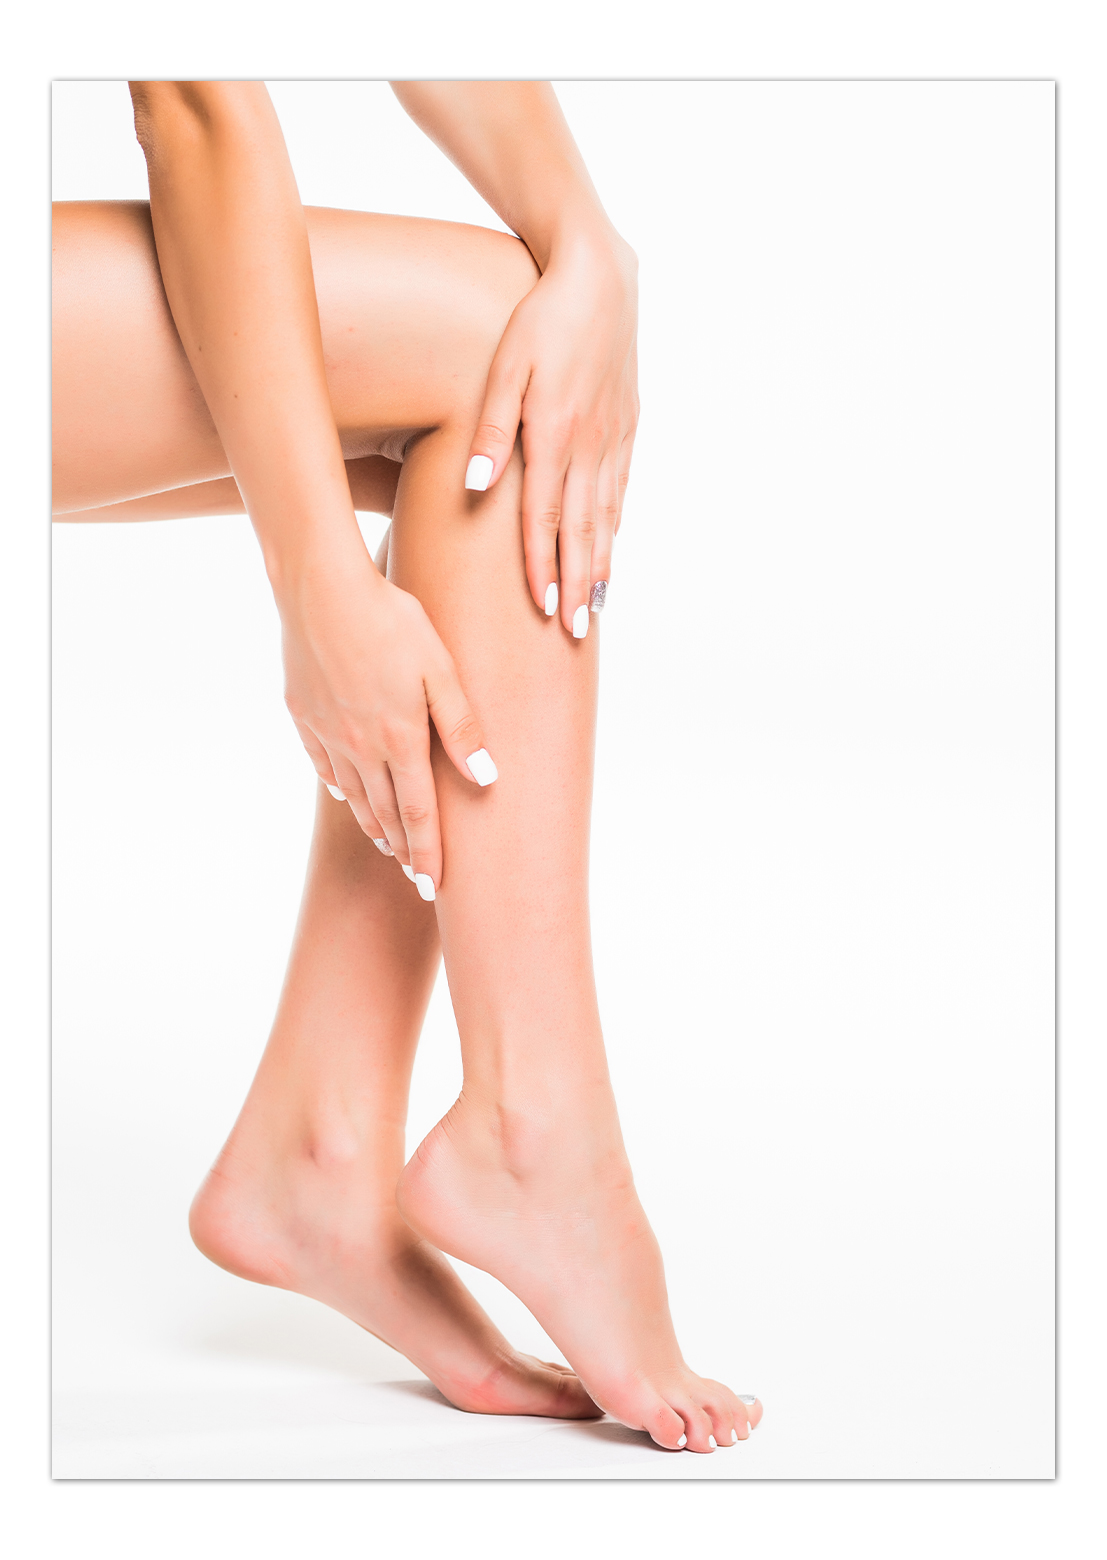 How to get rid of strawberry legs: Treatment and prevention